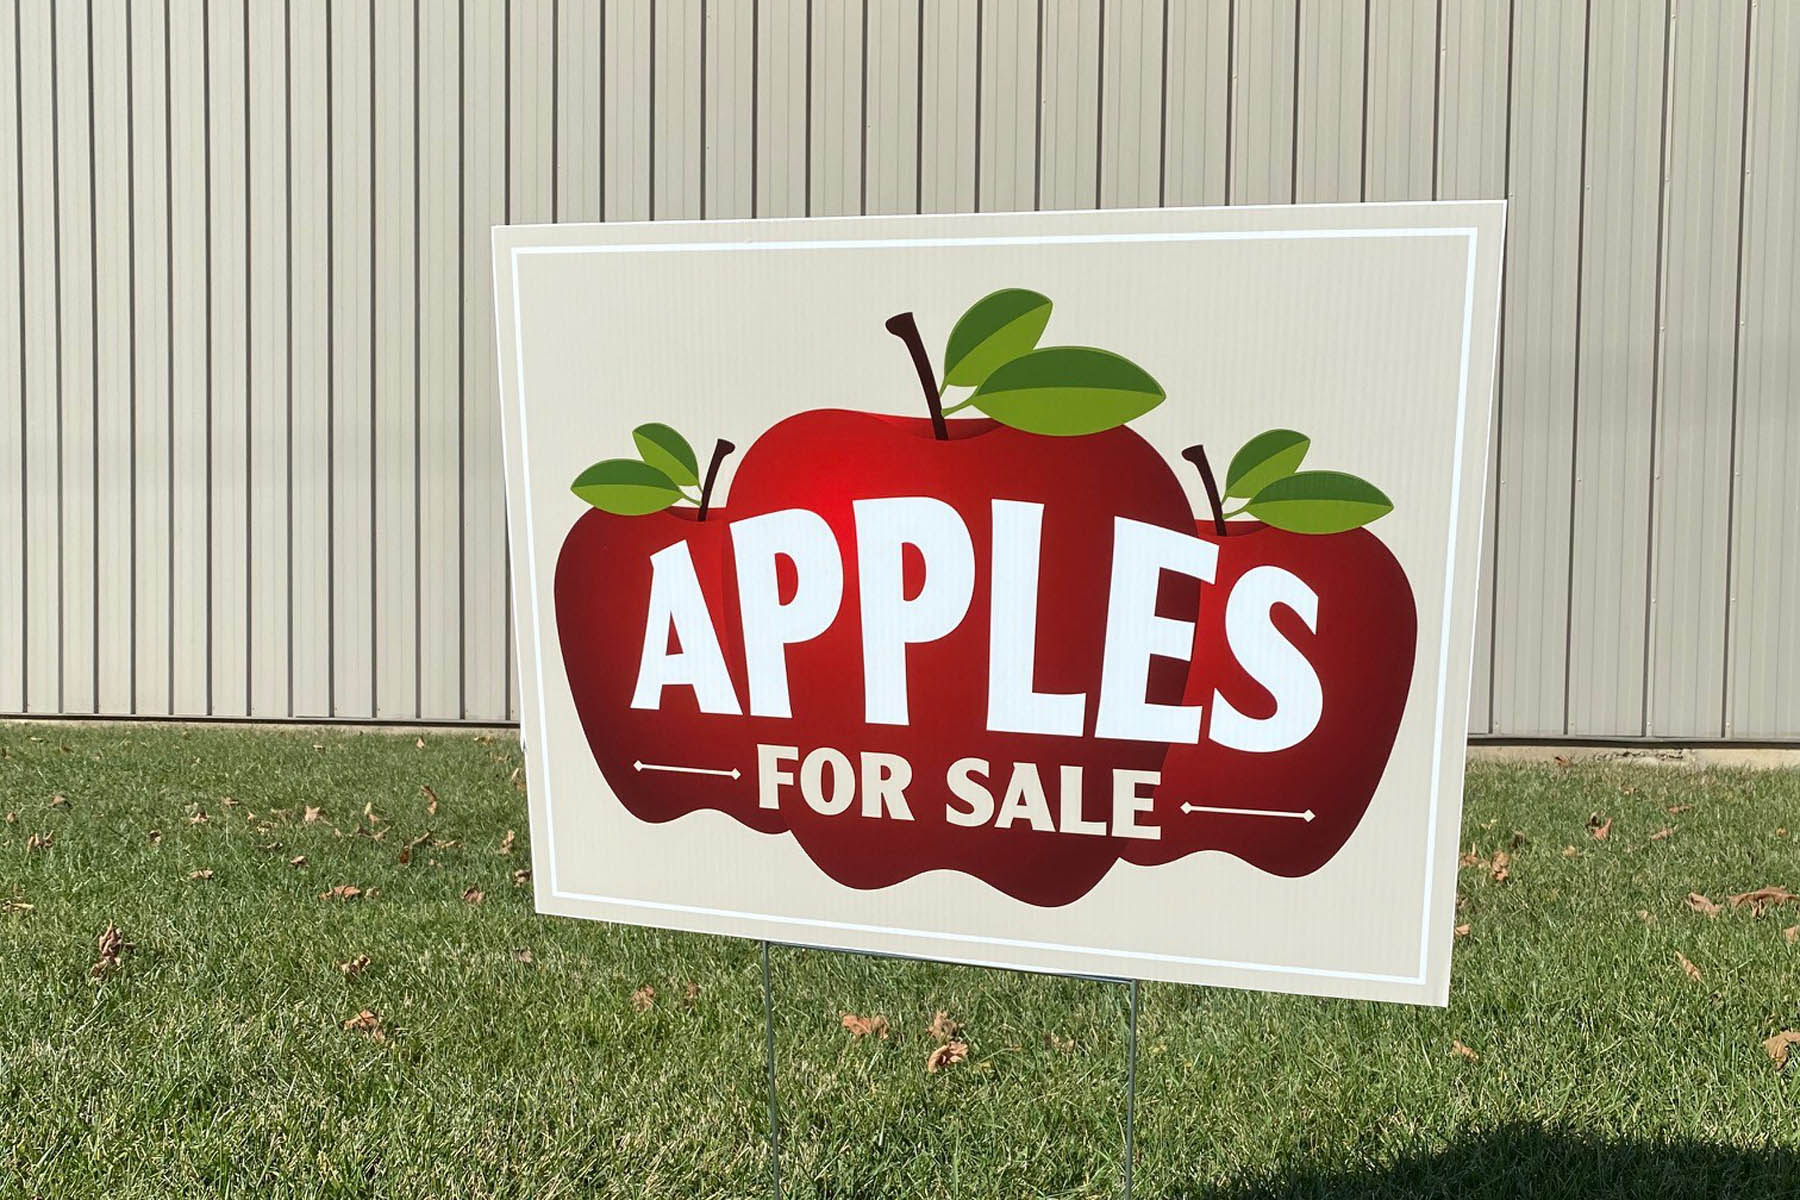 Apples for sale yard sign featuring three red apples